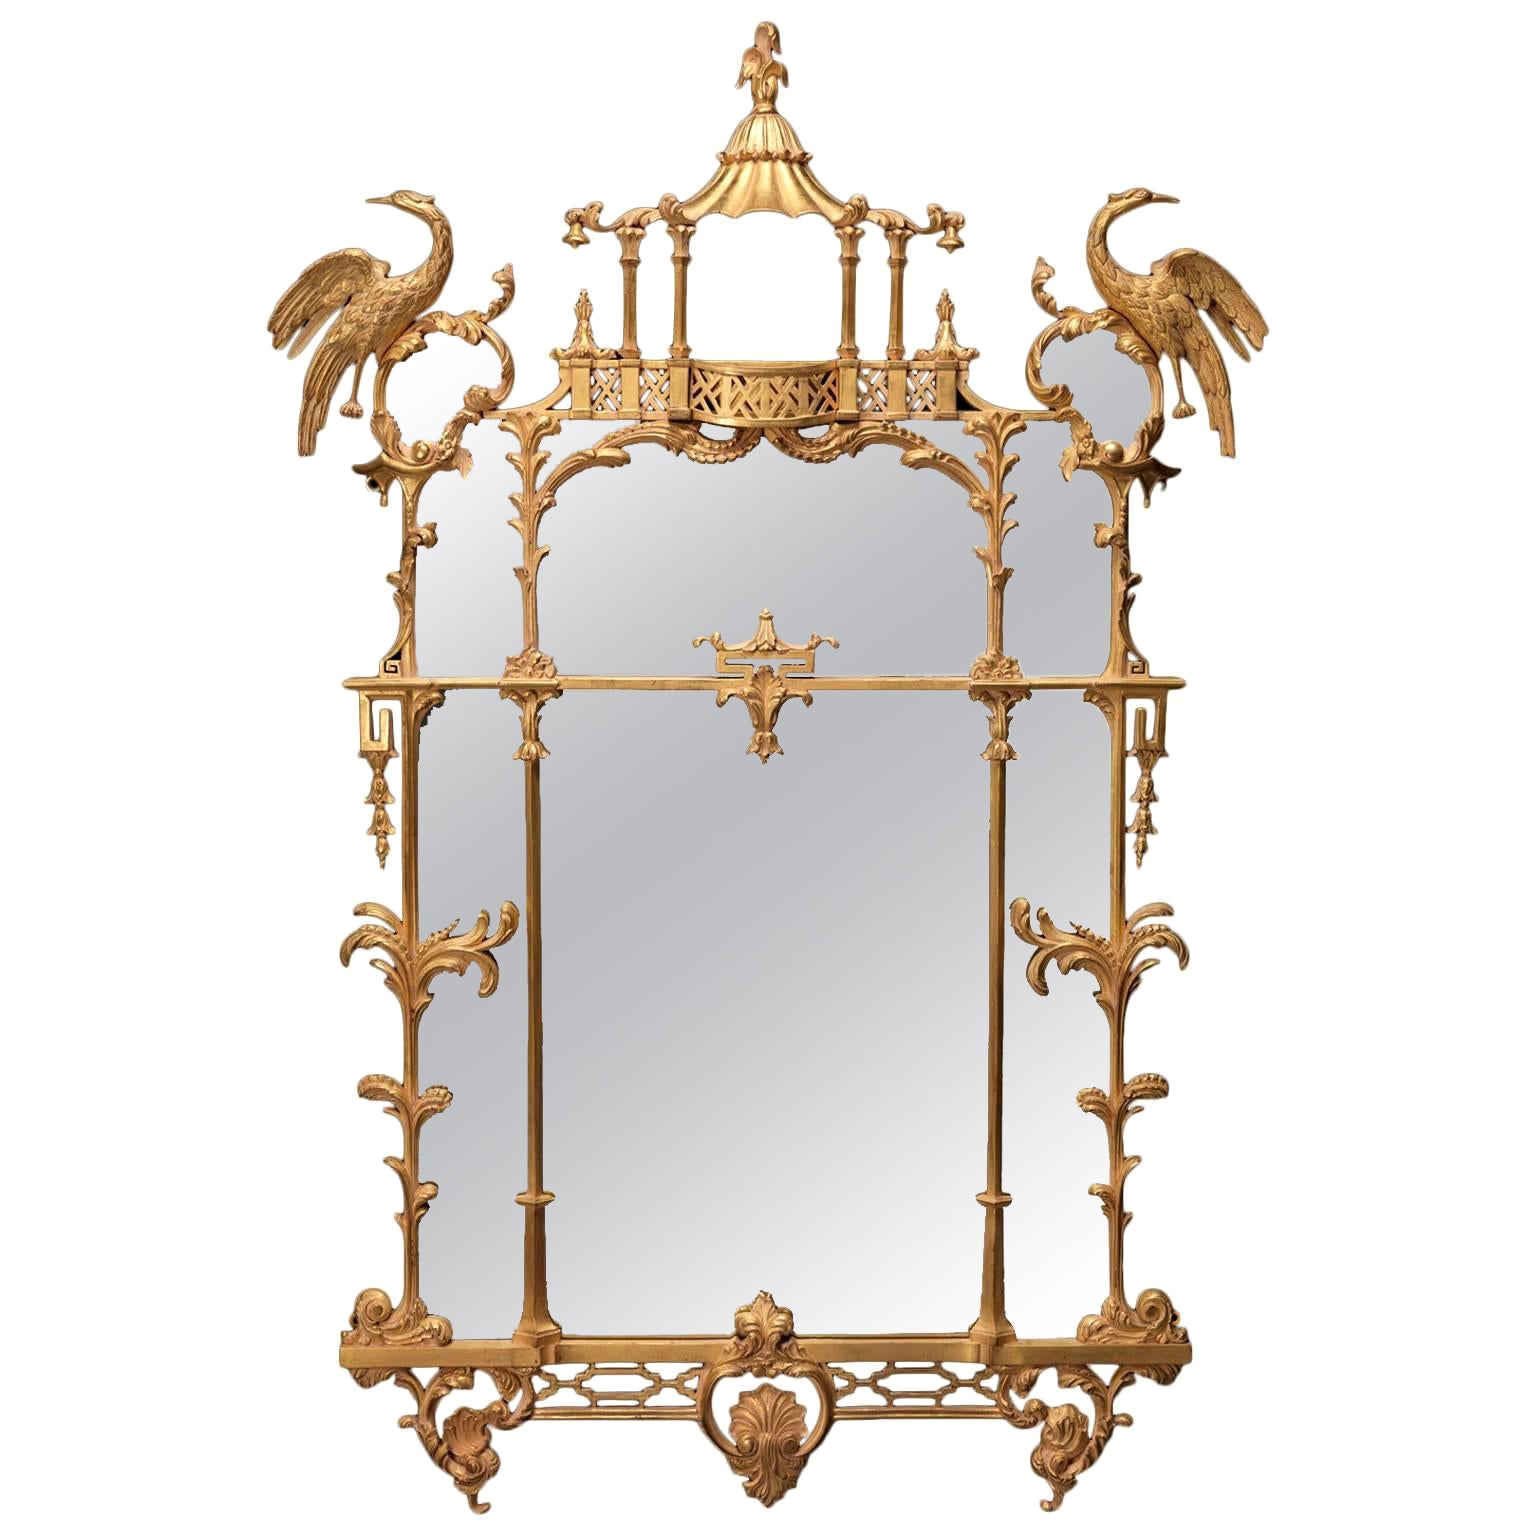 Chippendale Nostell Priory Mirror For Sale